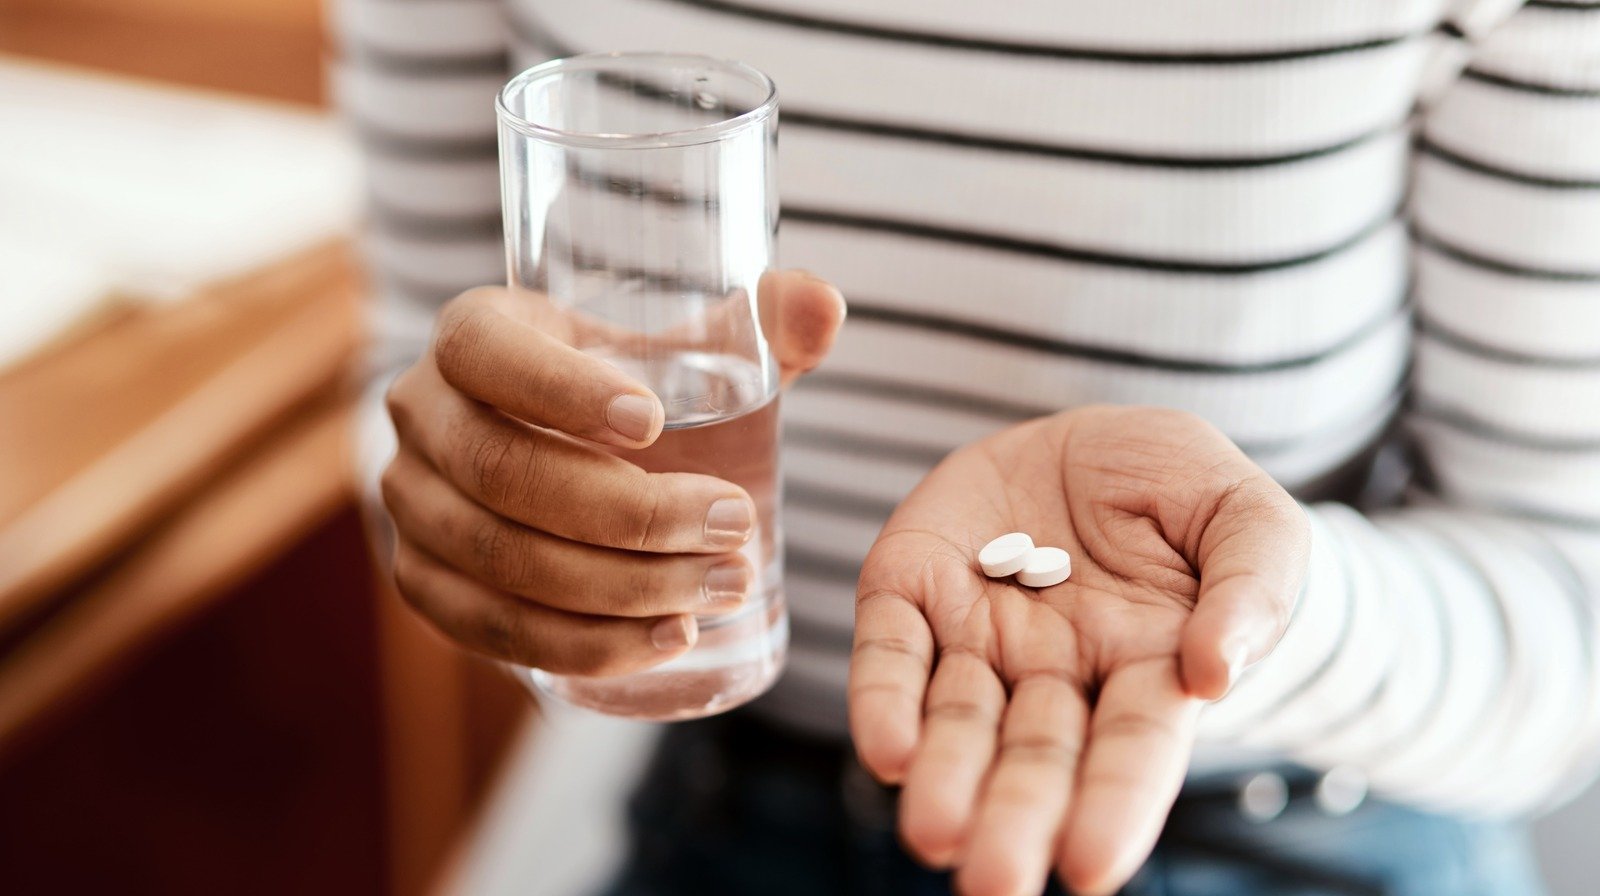 This Common Medication May Have An Unexpected Effect On Your Personality